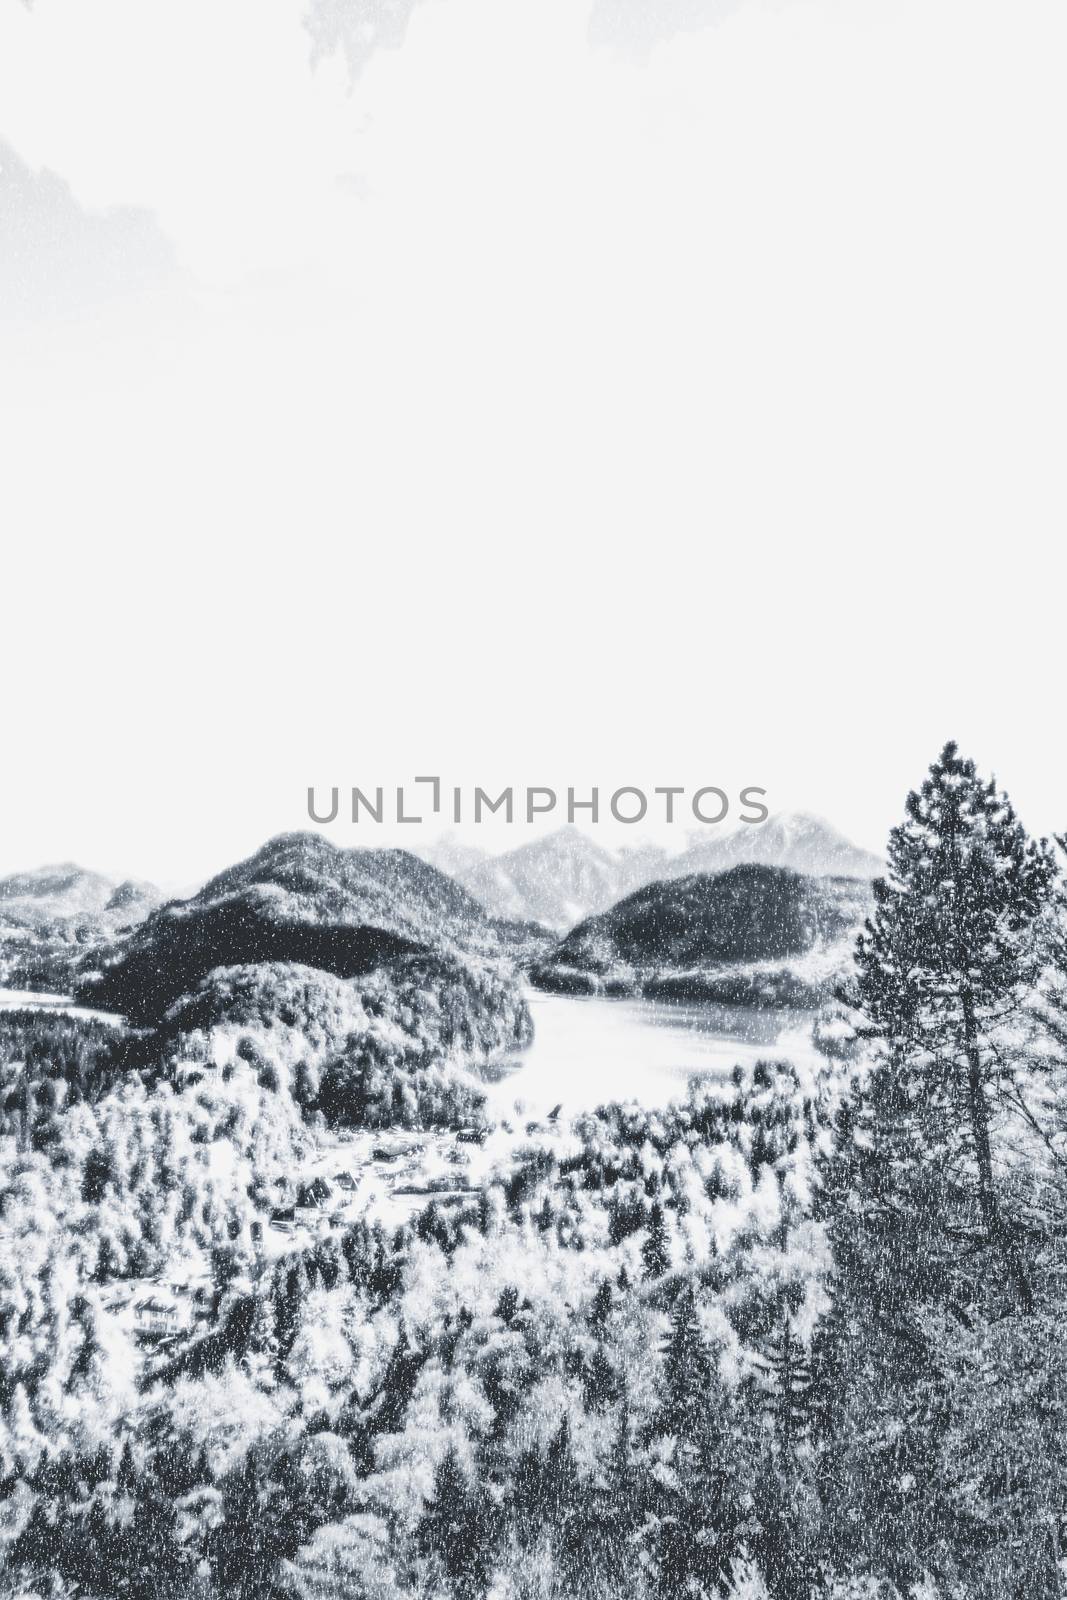 Christmas card with snowy mountains landscape in winter, monochrome photograph for art prints and printable designs